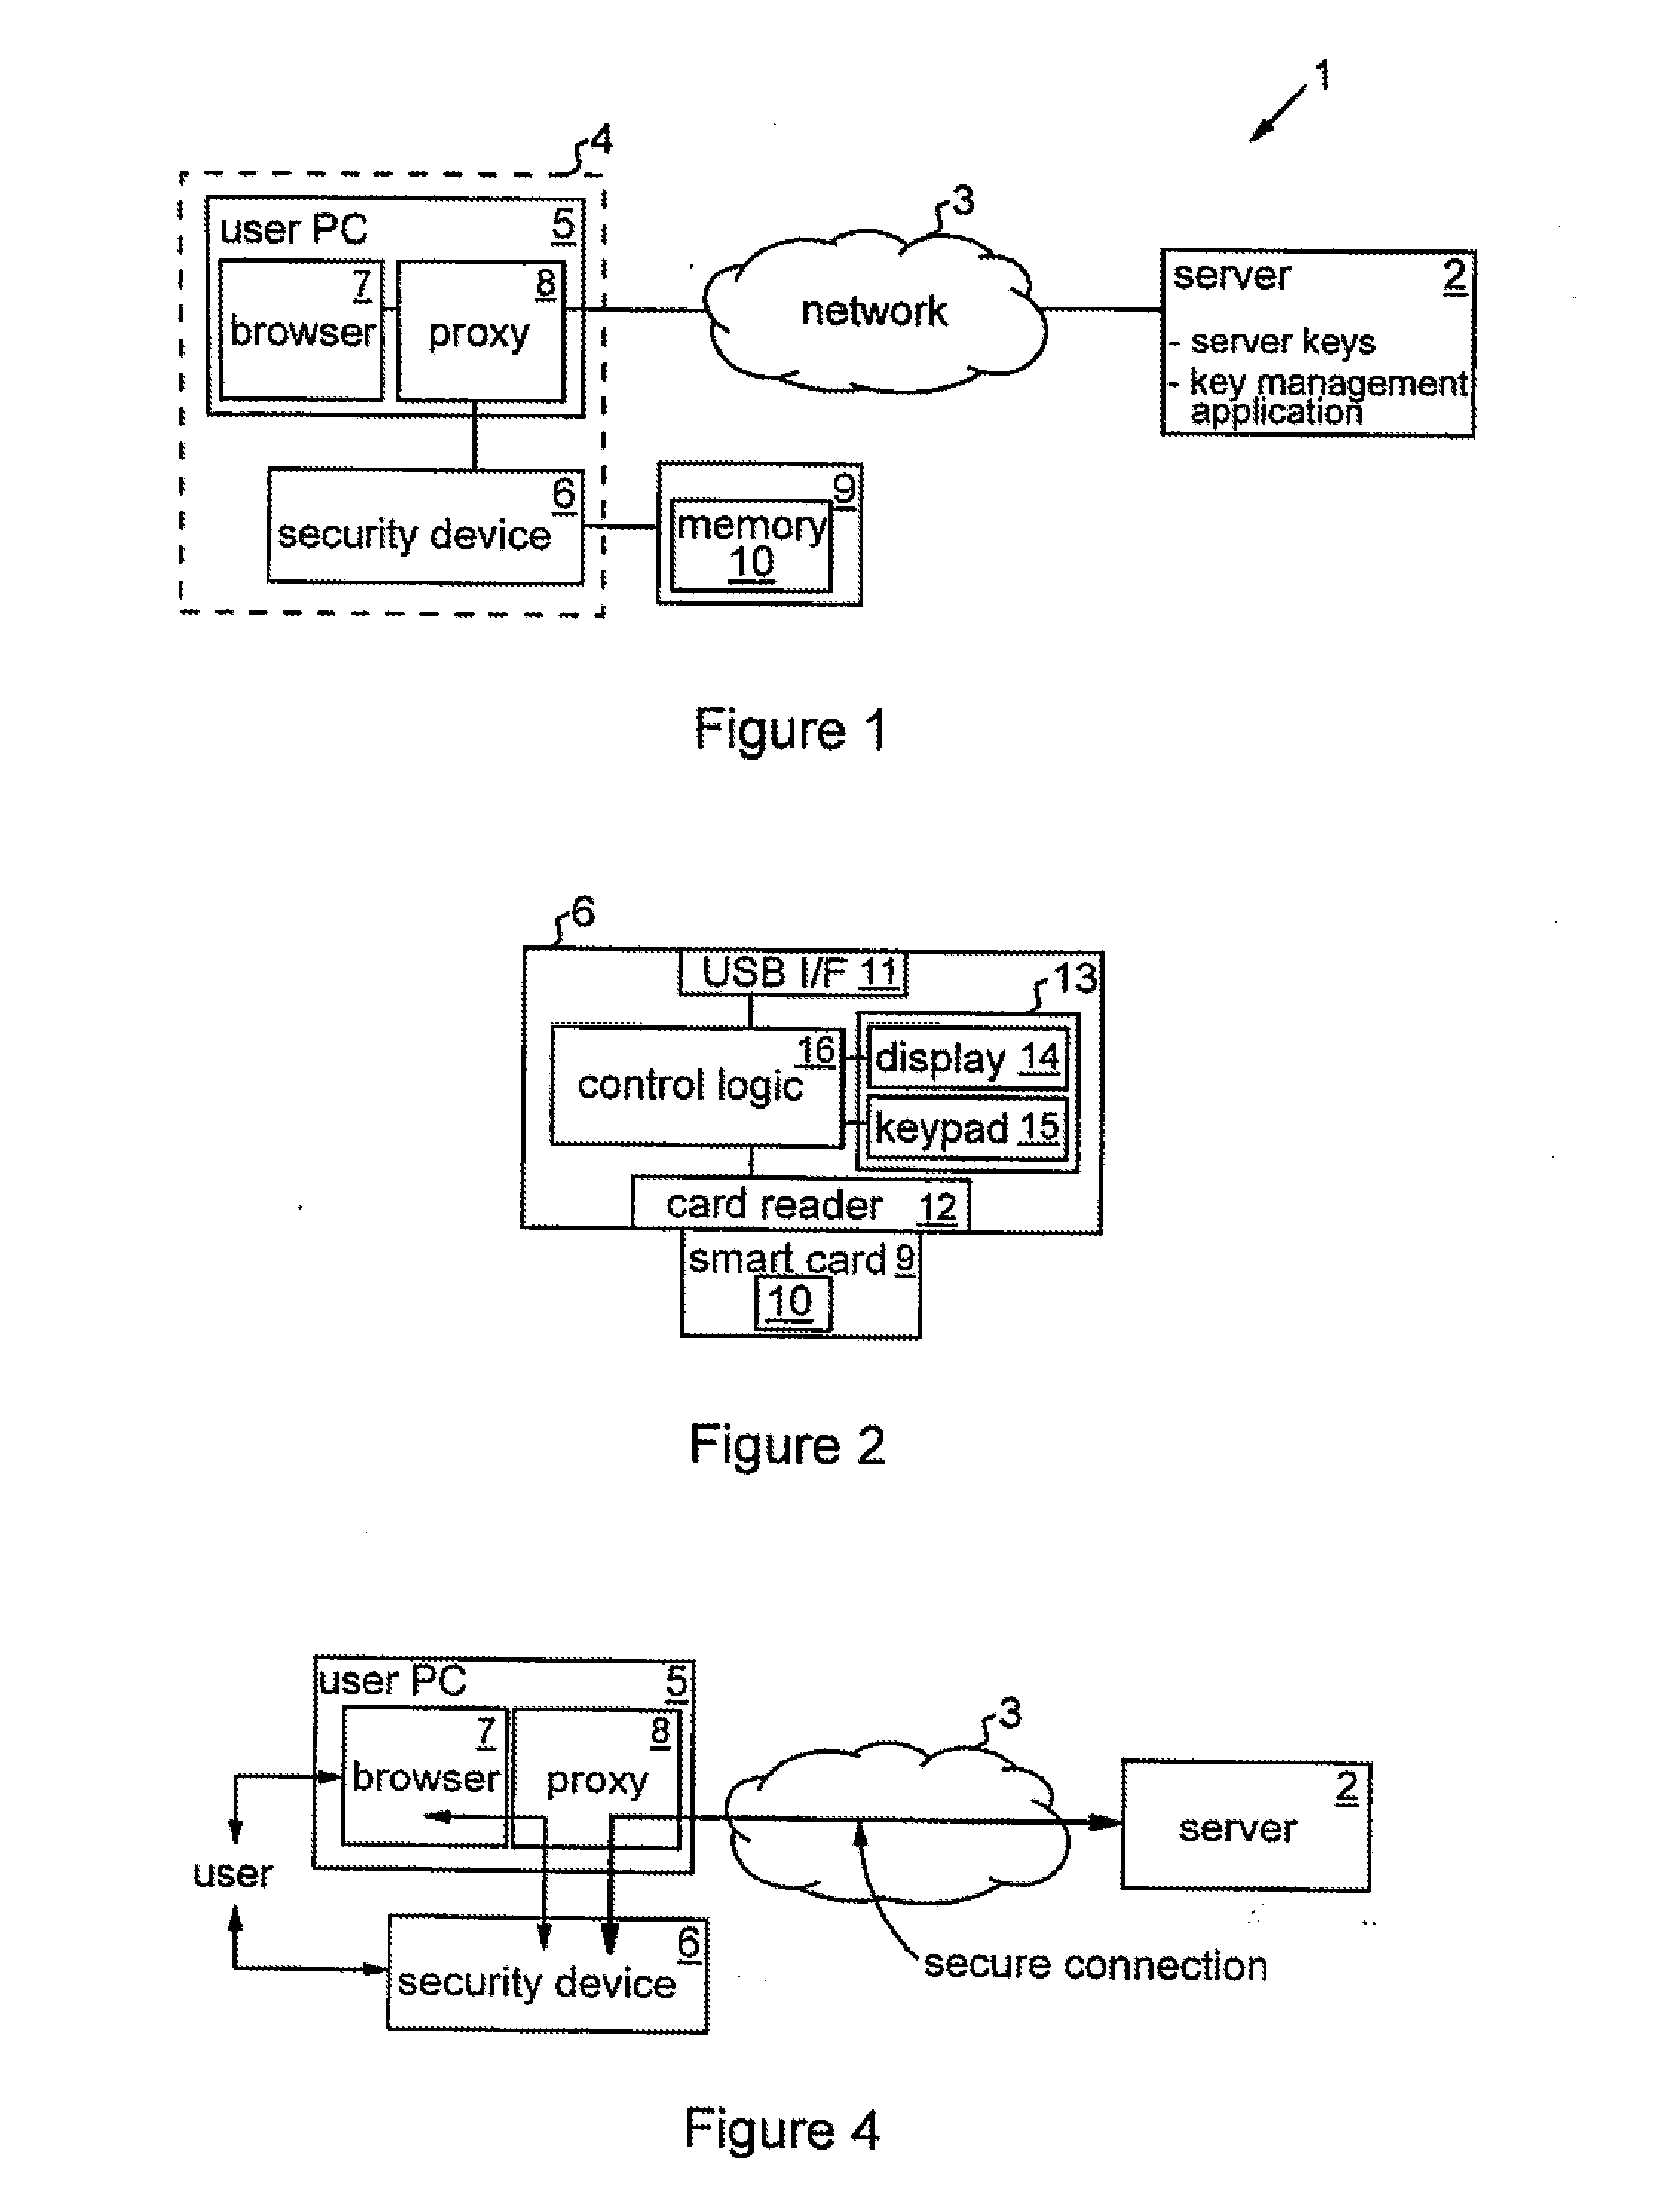 Management of secret data items used for server authentication